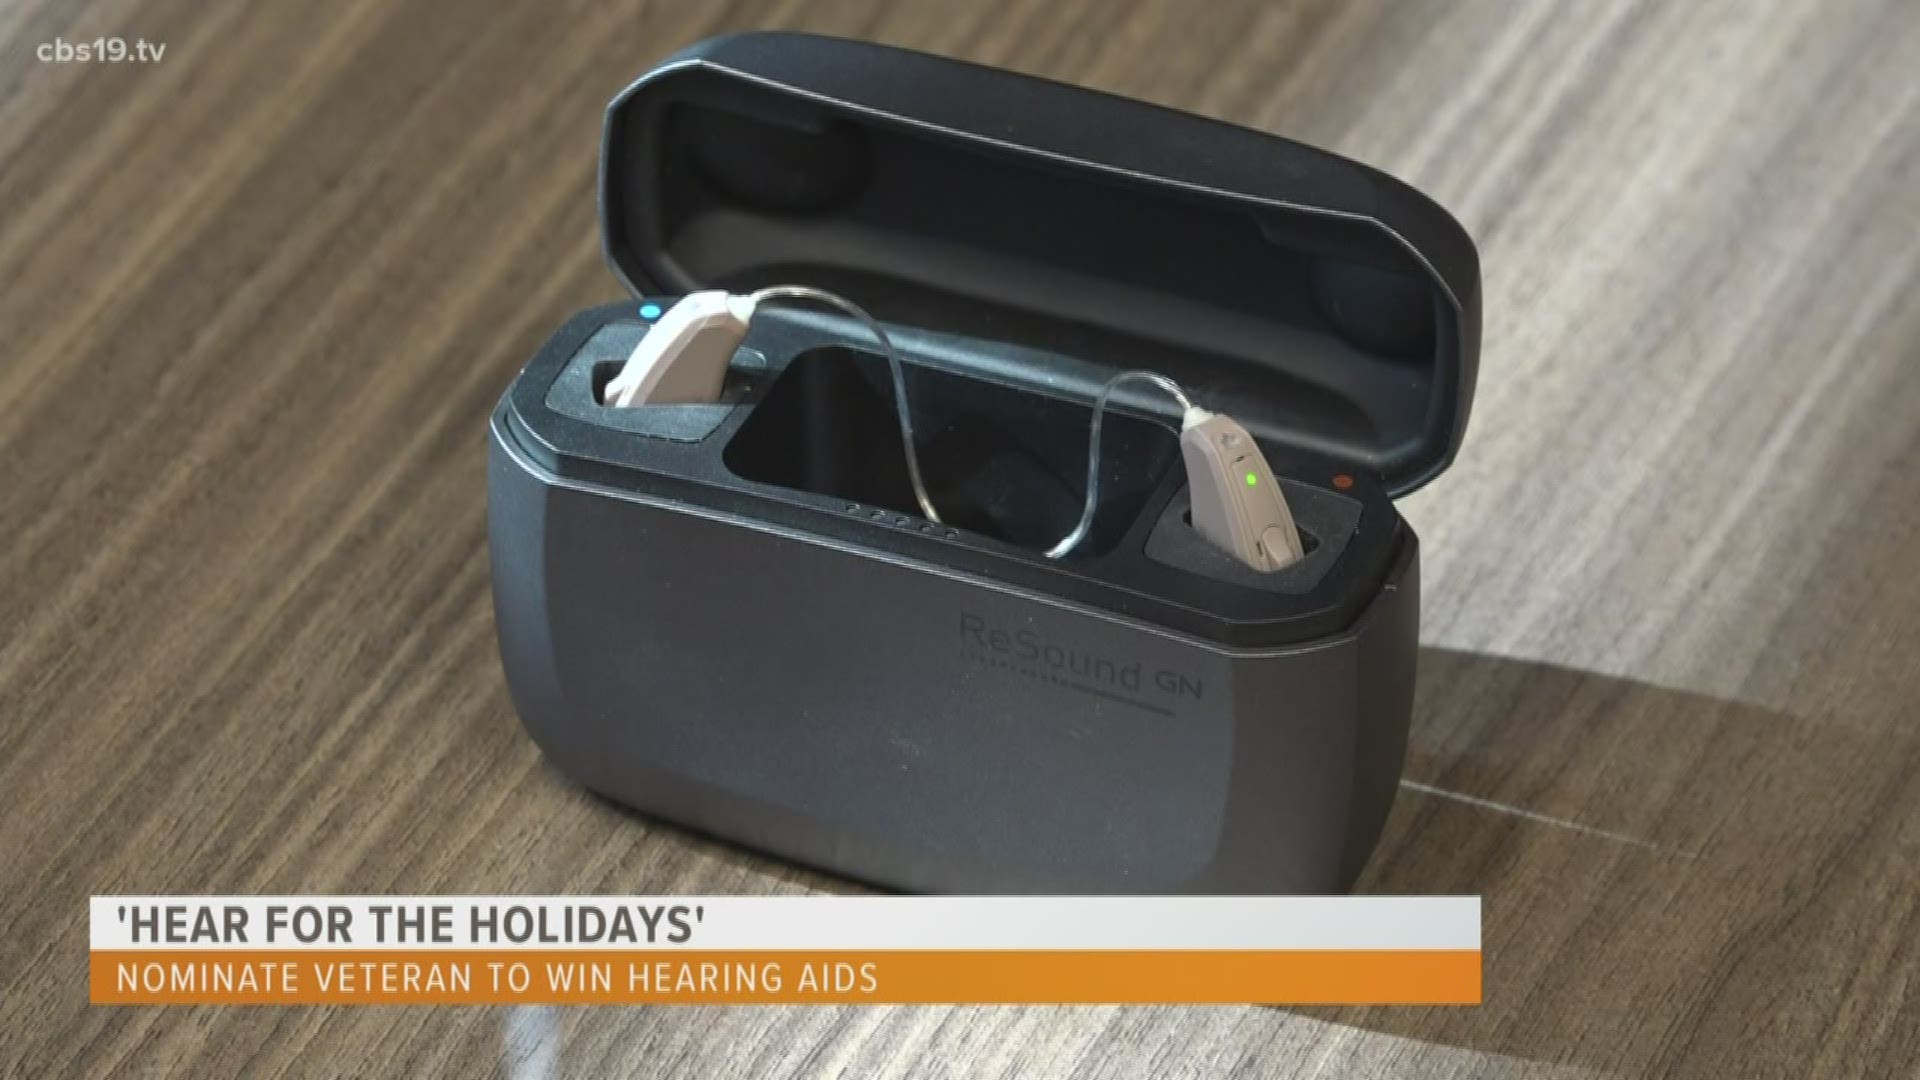 The holidays can be a joyous time with family and friends, but for others it can be an isolating season. An ETX business is giving hearing aids to a veteran.